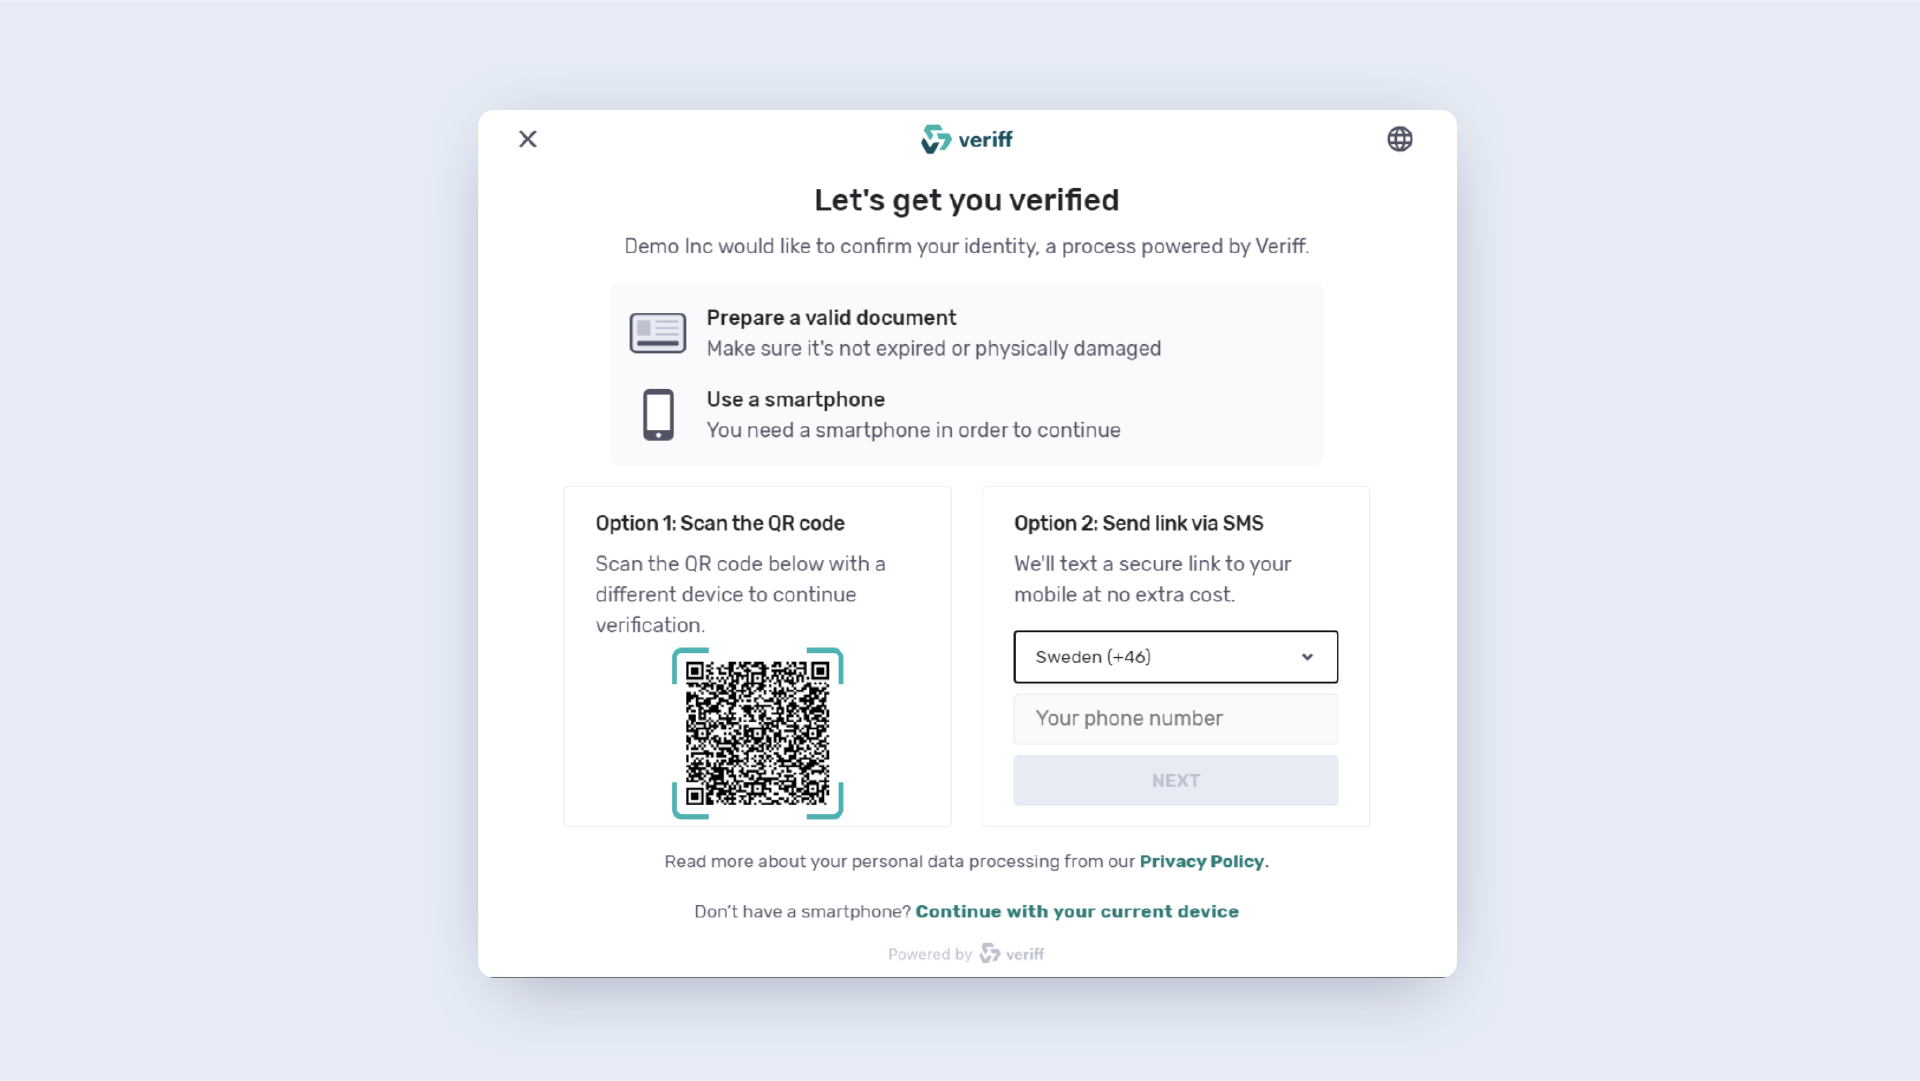 Demo graphic that shows how to get verified.